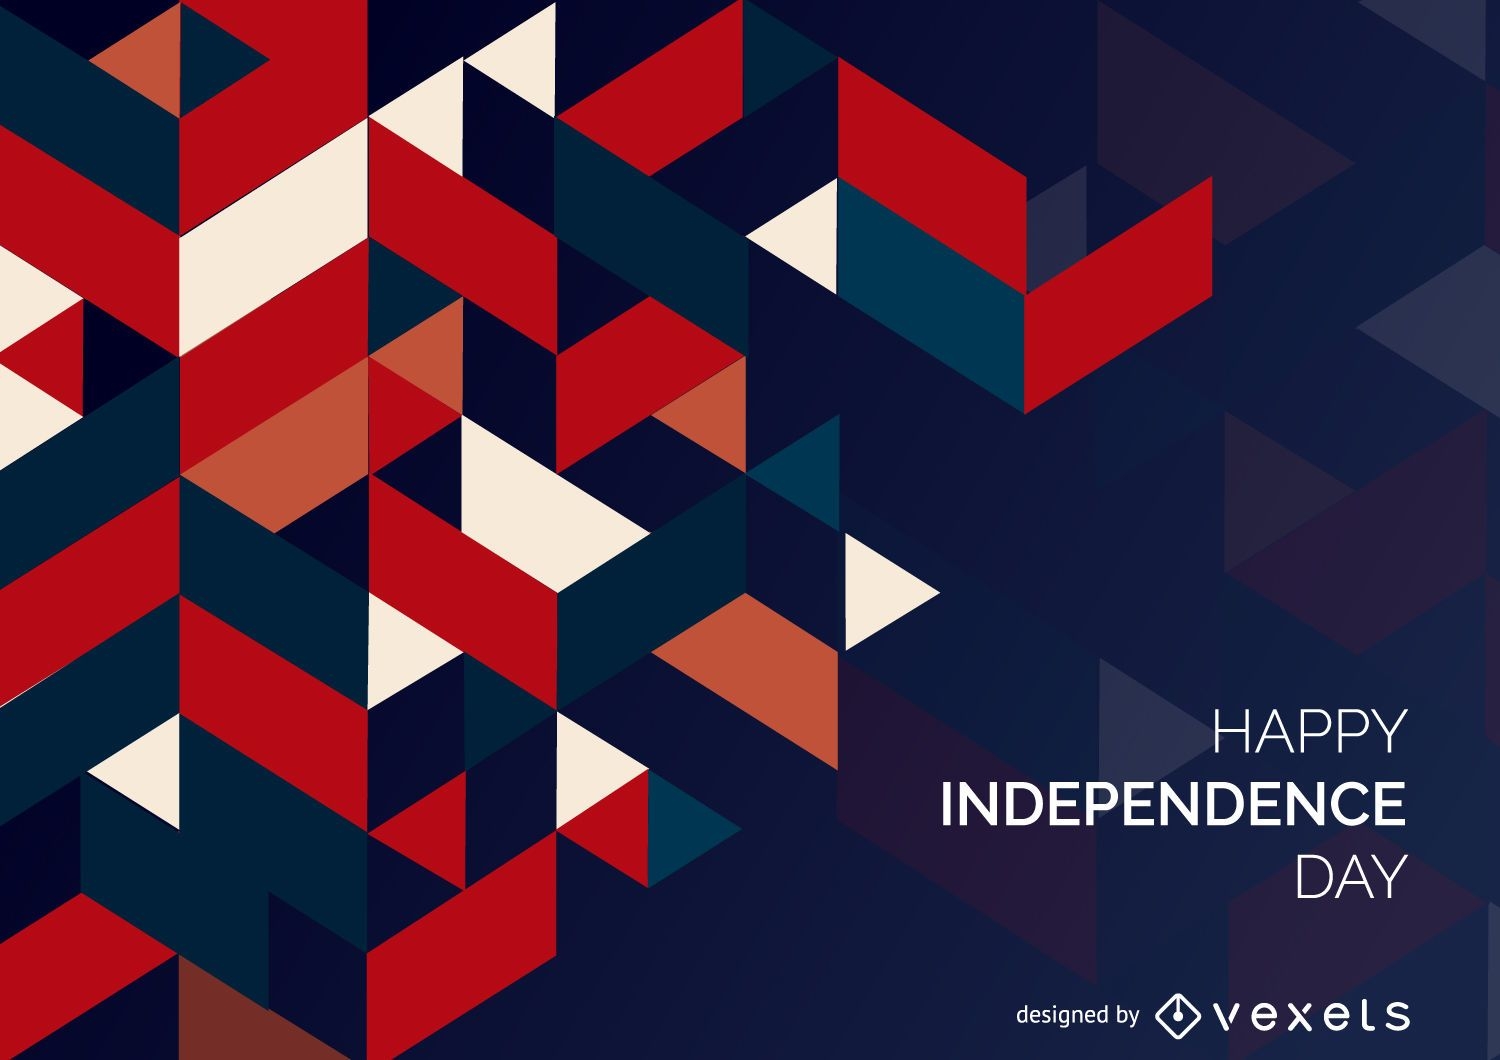 Polygonal Independence Day texture